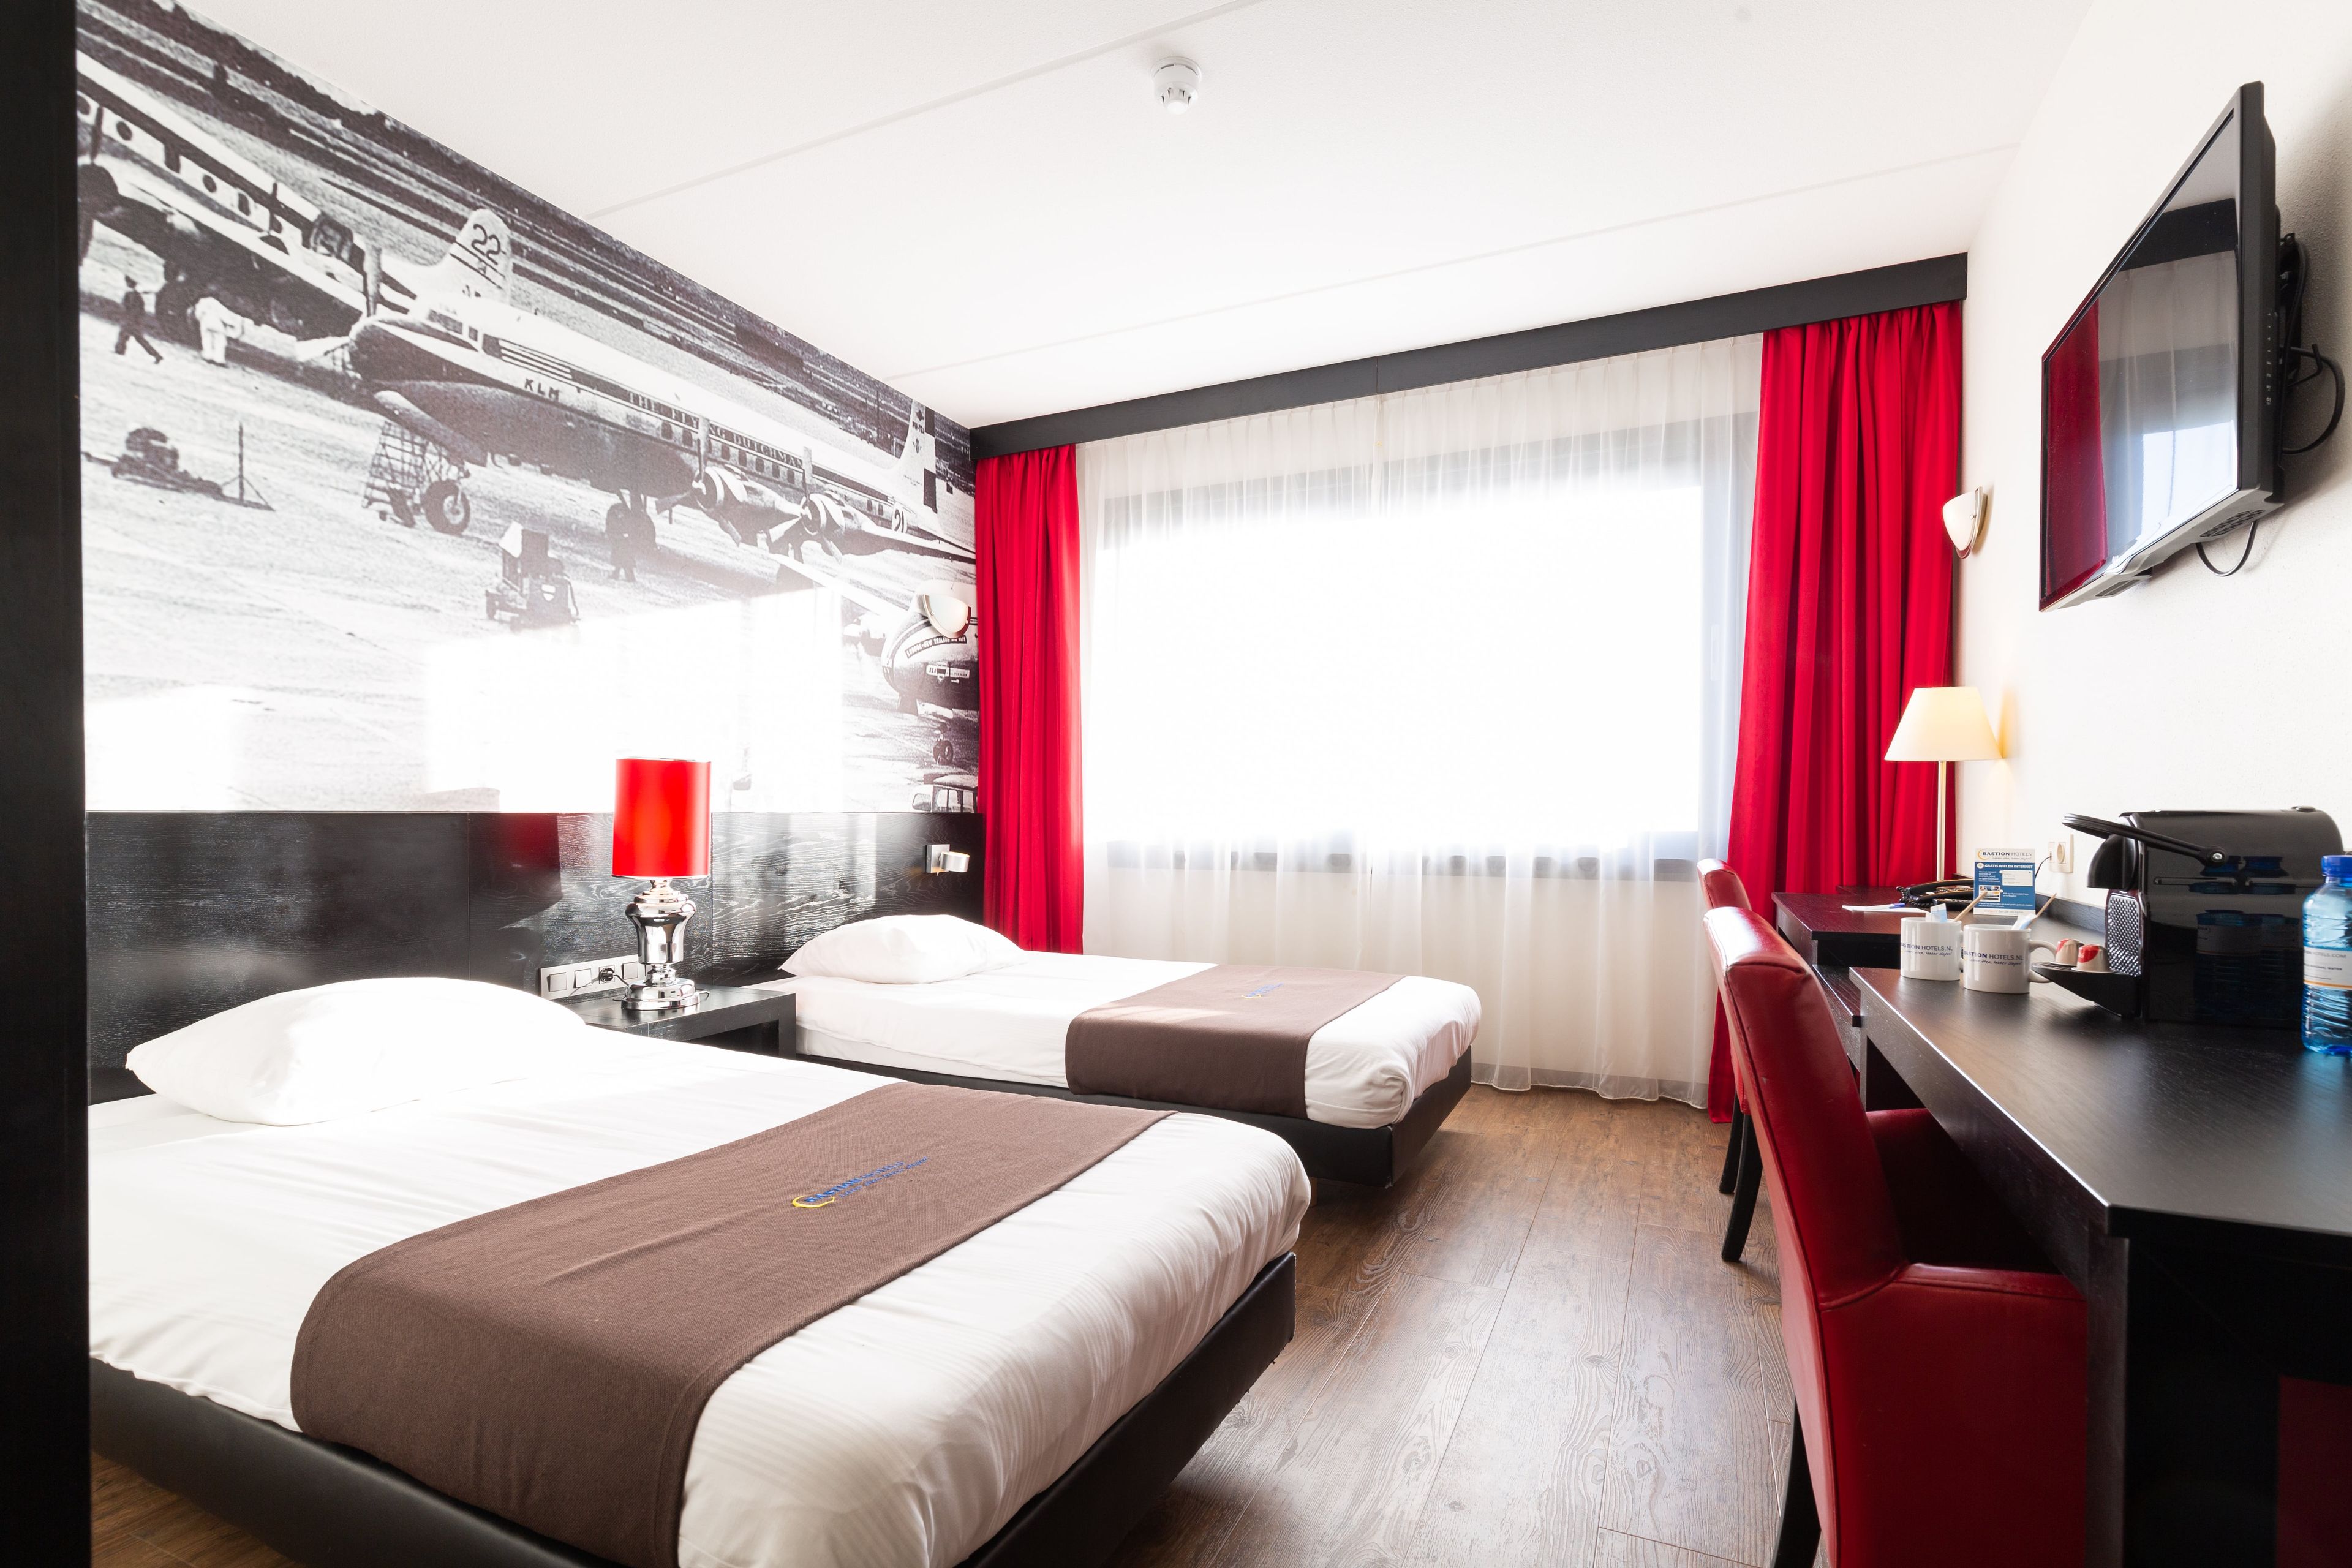 Bastion Hotel Amsterdam Airport <br/>53.00 ew <br/> <a href='http://vakantieoplossing.nl/outpage/?id=adec15c327a08b040184deadcbdb7daf' target='_blank'>View Details</a>